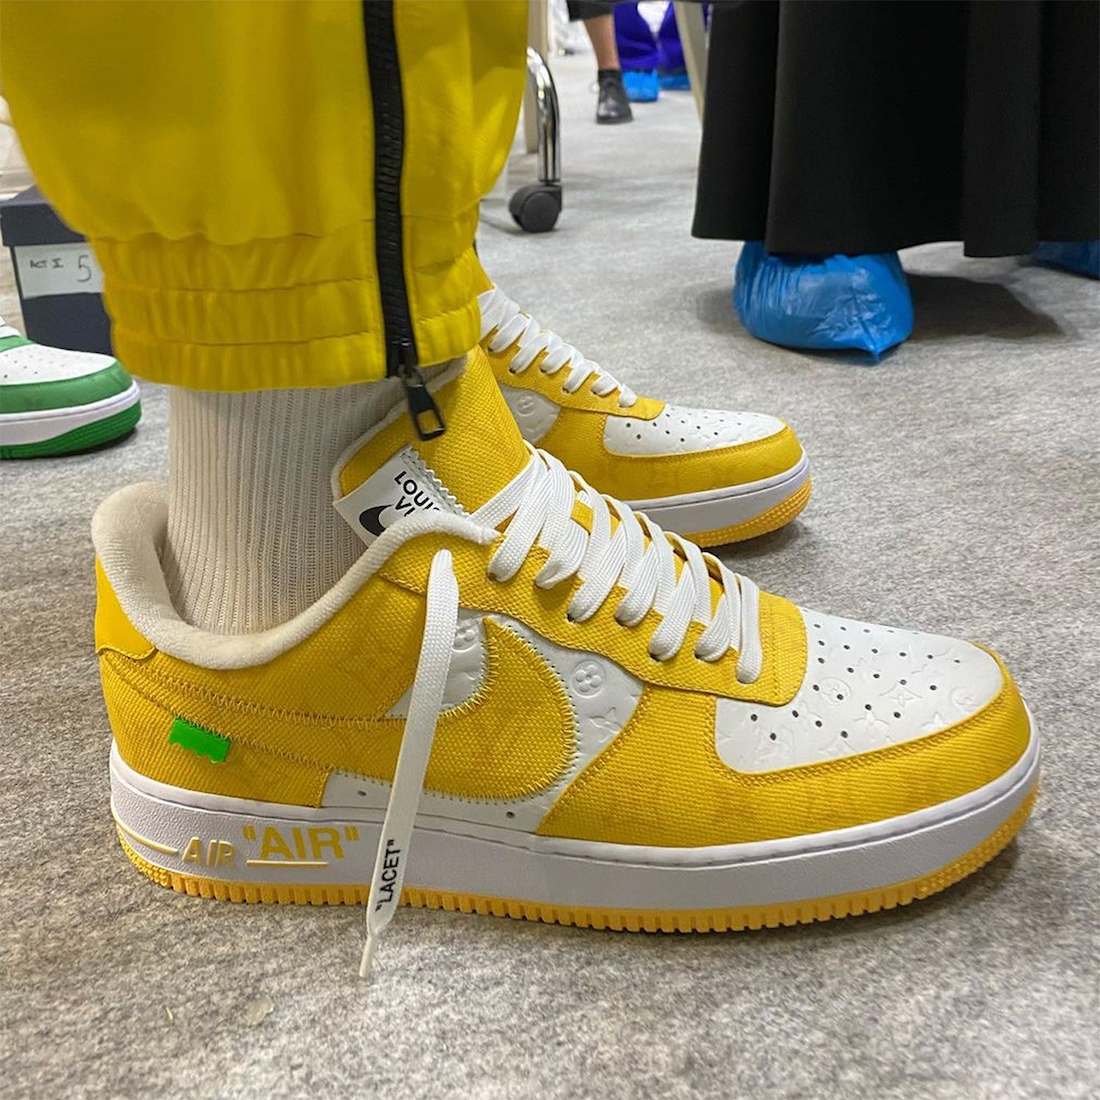 LoRA] Nike AF1 x Louis vuitton - Sneaker - v1.0, Stable Diffusion LoRA